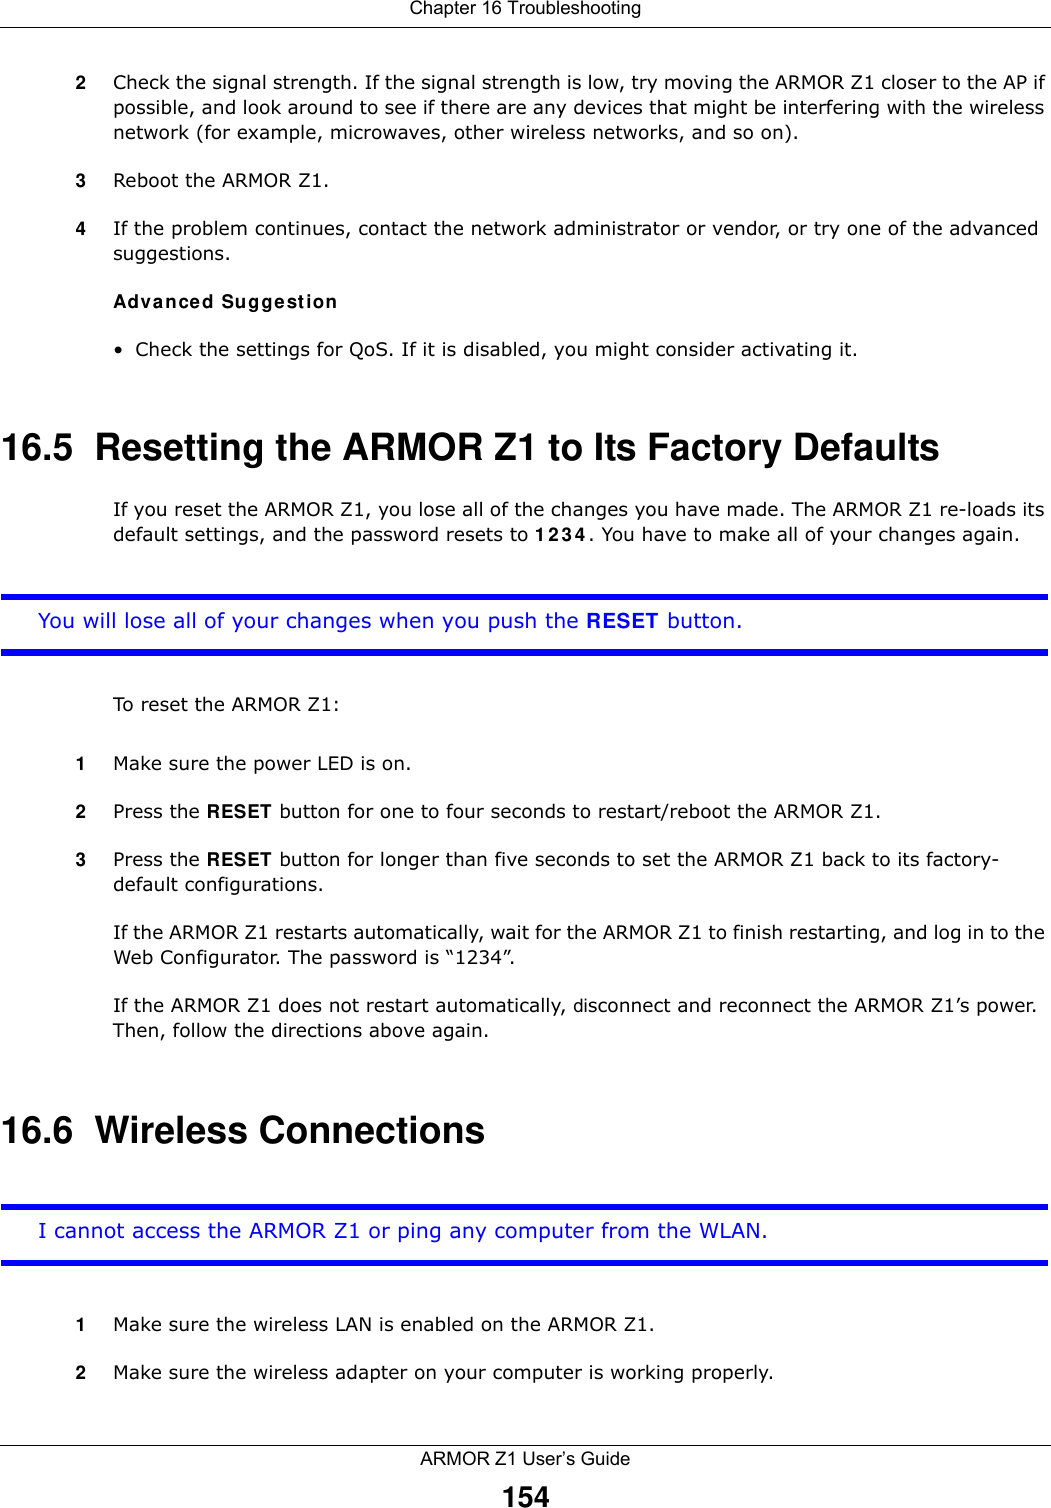 Chapter 16 TroubleshootingARMOR Z1 User’s Guide1542Check the signal strength. If the signal strength is low, try moving the ARMOR Z1 closer to the AP if possible, and look around to see if there are any devices that might be interfering with the wireless network (for example, microwaves, other wireless networks, and so on).3Reboot the ARMOR Z1.4If the problem continues, contact the network administrator or vendor, or try one of the advanced suggestions.Advanced Suggestion• Check the settings for QoS. If it is disabled, you might consider activating it.16.5  Resetting the ARMOR Z1 to Its Factory Defaults If you reset the ARMOR Z1, you lose all of the changes you have made. The ARMOR Z1 re-loads its default settings, and the password resets to 1234. You have to make all of your changes again.You will lose all of your changes when you push the RESET button.To reset the ARMOR Z1:1Make sure the power LED is on.2Press the RESET button for one to four seconds to restart/reboot the ARMOR Z1.3Press the RESET button for longer than five seconds to set the ARMOR Z1 back to its factory-default configurations.If the ARMOR Z1 restarts automatically, wait for the ARMOR Z1 to finish restarting, and log in to the Web Configurator. The password is “1234”.If the ARMOR Z1 does not restart automatically, disconnect and reconnect the ARMOR Z1’s power. Then, follow the directions above again.16.6  Wireless ConnectionsI cannot access the ARMOR Z1 or ping any computer from the WLAN.1Make sure the wireless LAN is enabled on the ARMOR Z1.2Make sure the wireless adapter on your computer is working properly.